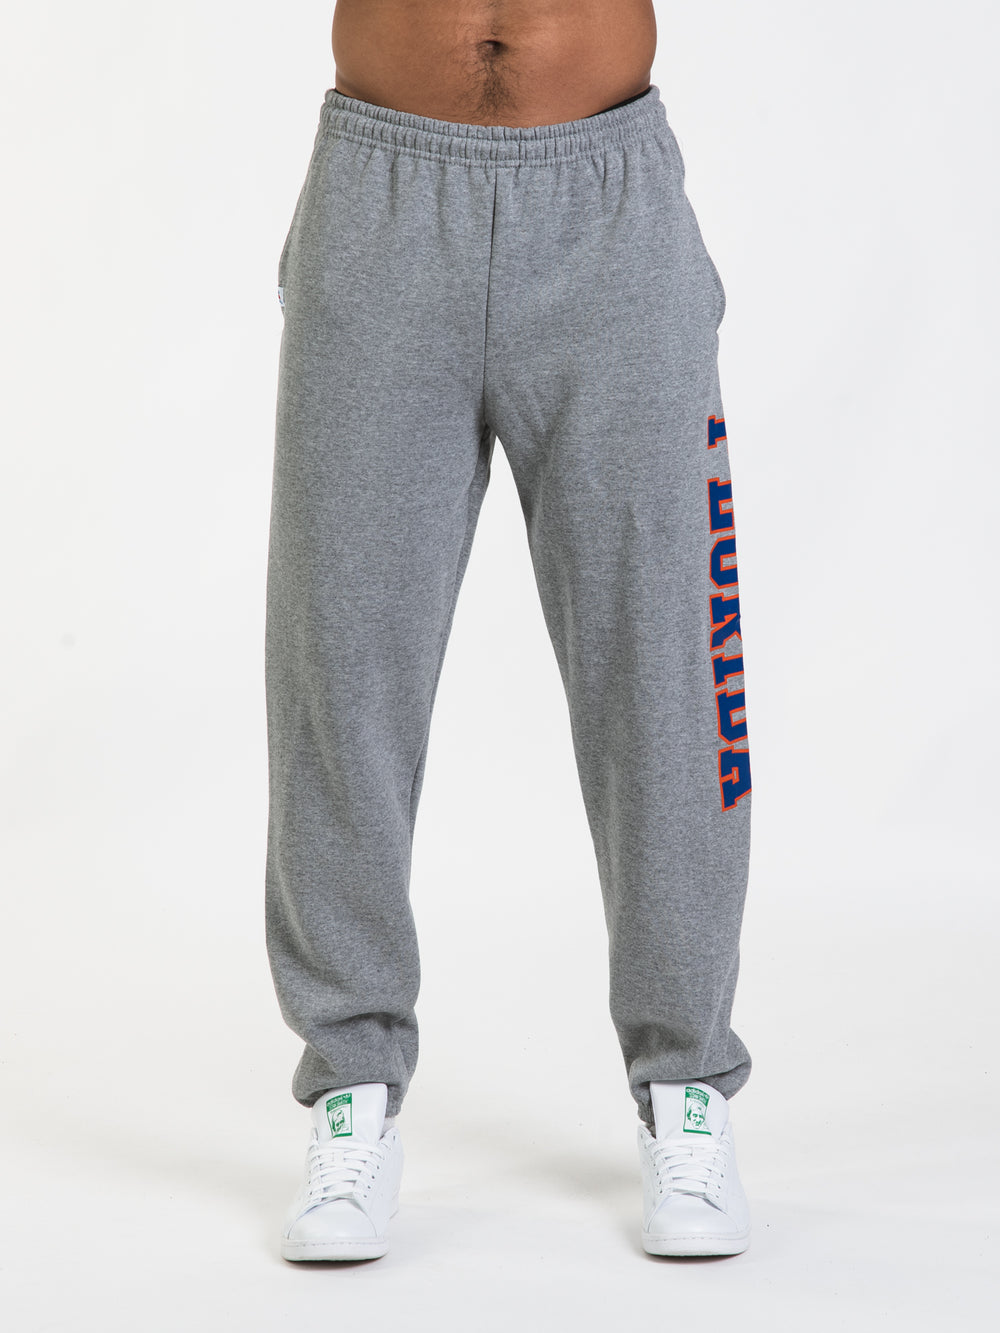 RUSSELL FLORIDA SWEATPANT - CLEARANCE